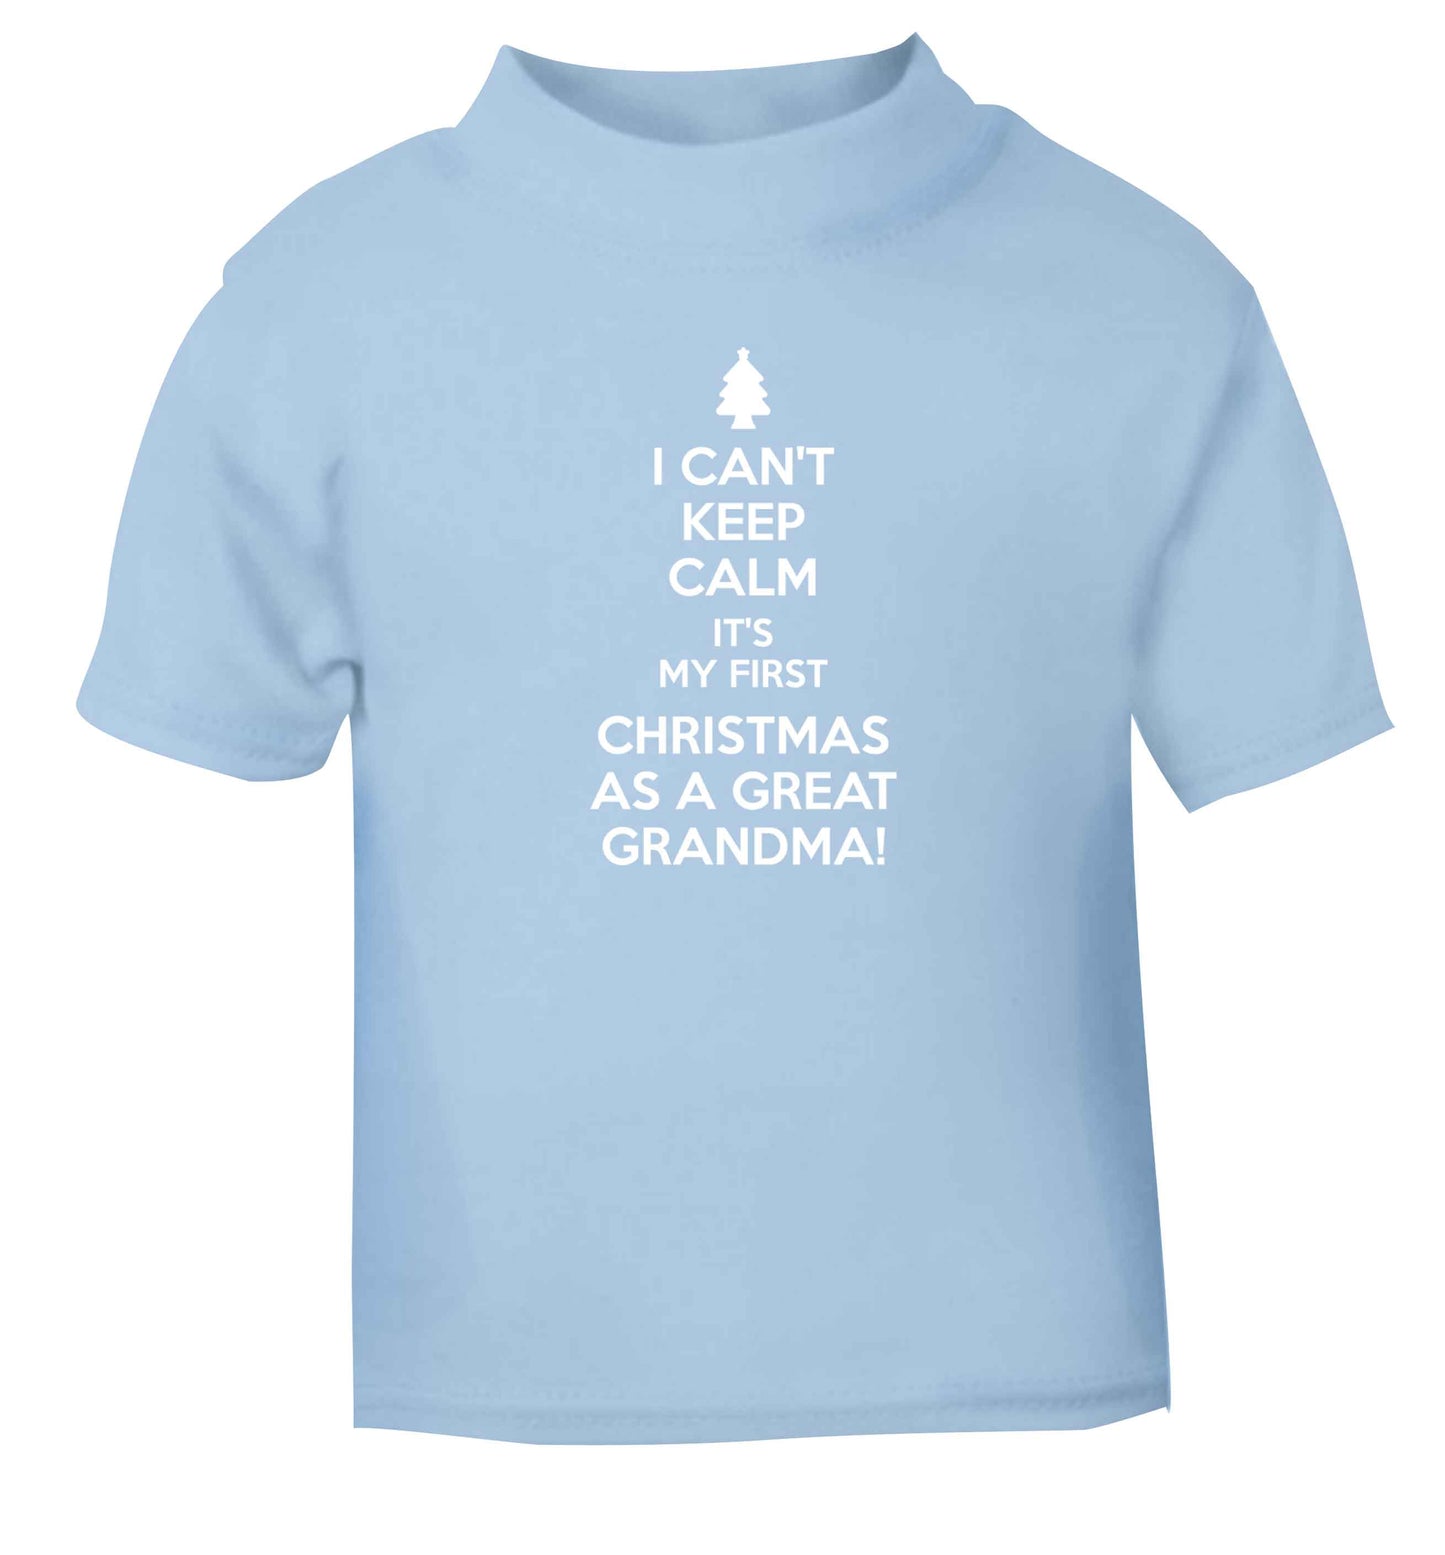 I can't keep calm it's my first Christmas as a great grandma! light blue Baby Toddler Tshirt 2 Years